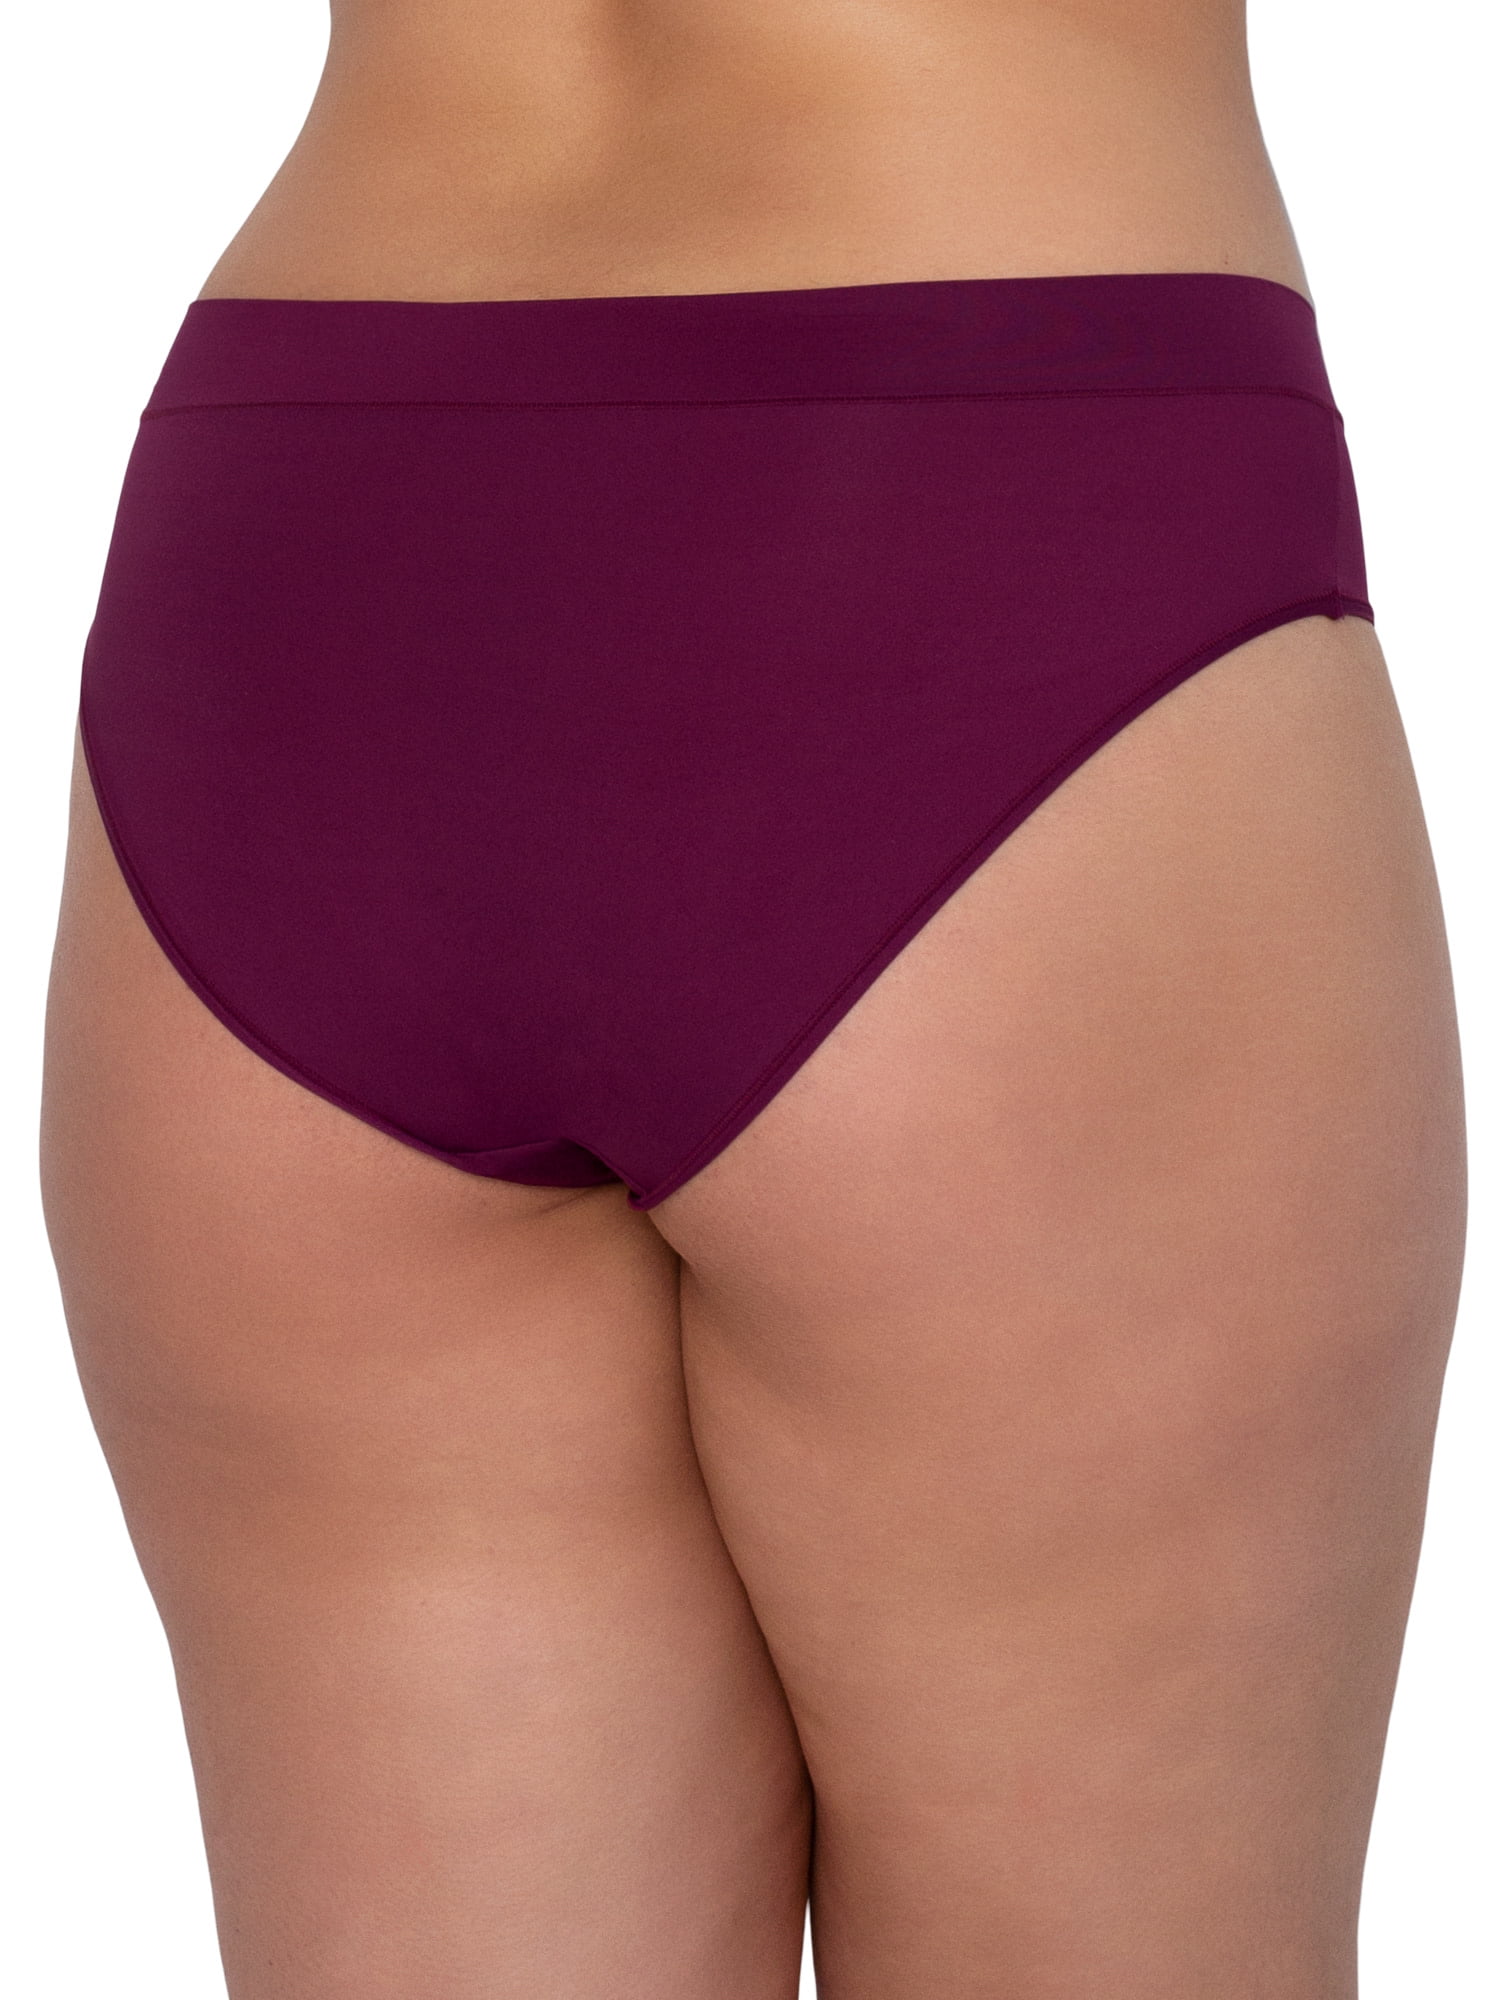 Buy PLEASURE Women's 93% Modal & 7% Spandex Hipster Mid Waist Panties (Size  L, Multicolor, Pack of 3) Model No: APMMBA14 at